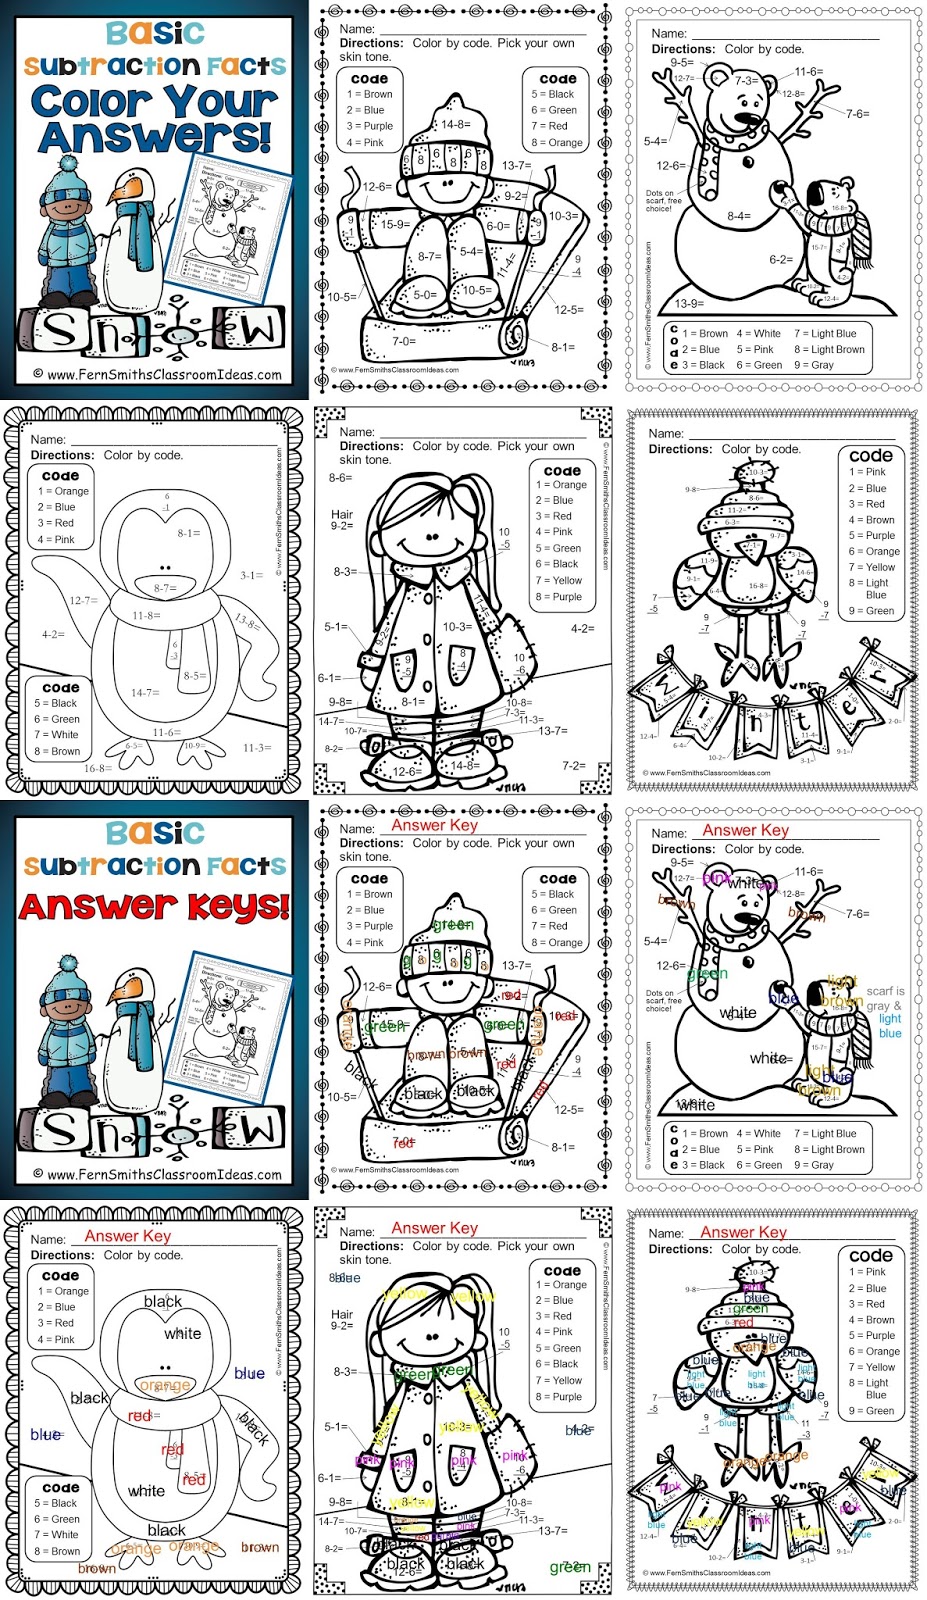 Fern Smith's Classroom Ideas Winter Fun! Basic Subtraction Facts - Color Your Answers Printables at TPT.